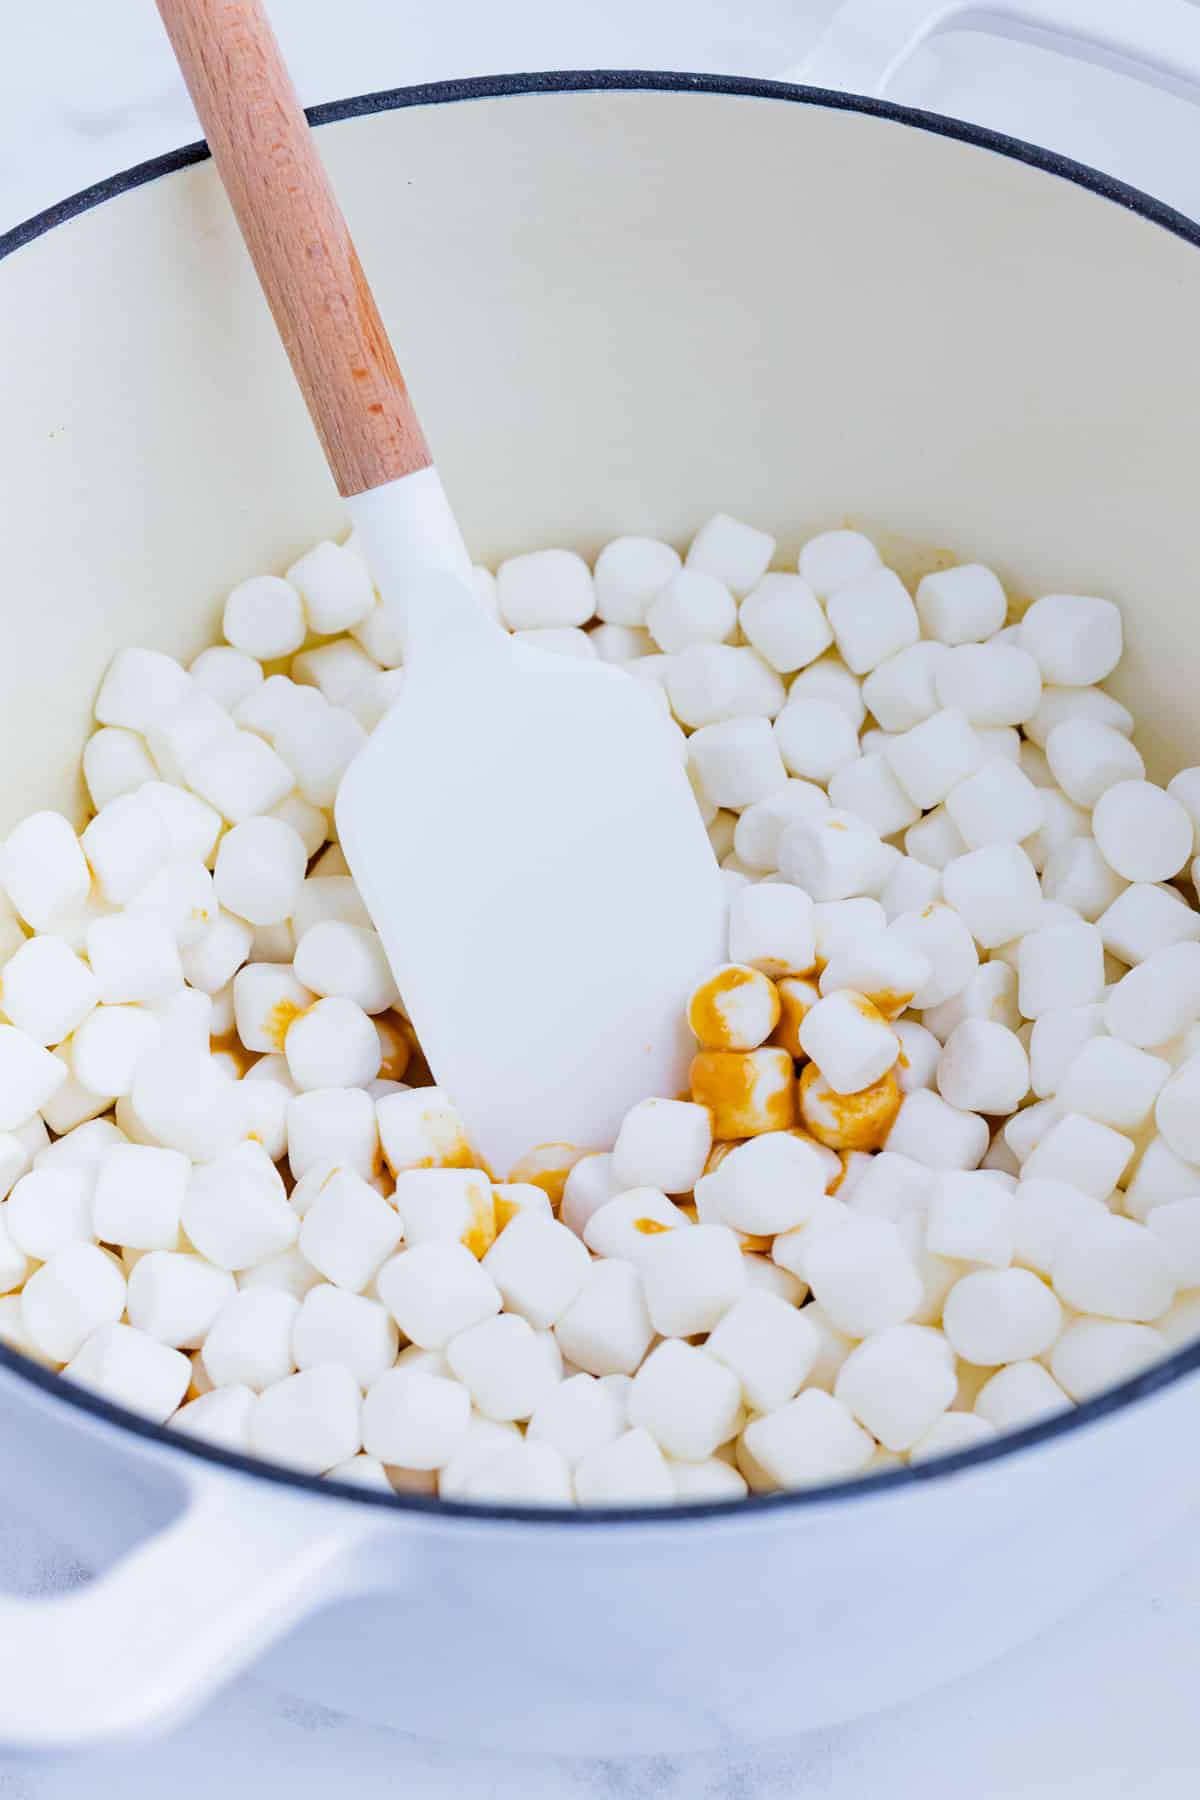 Mini marshmallows are mixed into the butter mixture.